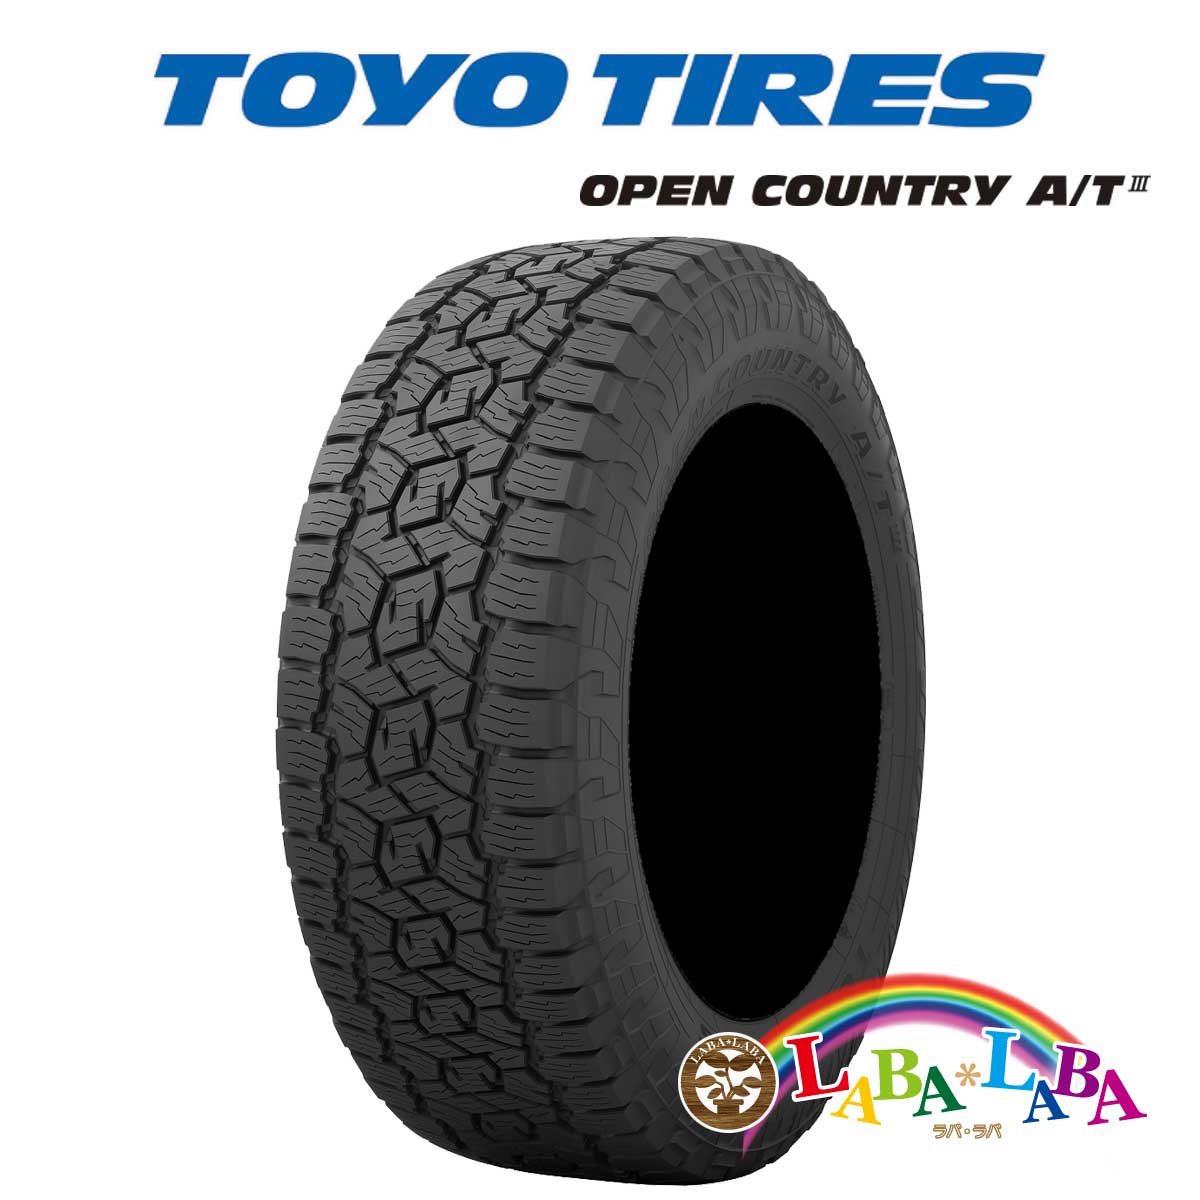 TOYO OPEN COUNTRY A/TIII (A/T3) 195/80R15 96S オールテレーン SUV 4WD 2本セット｜laba-laba